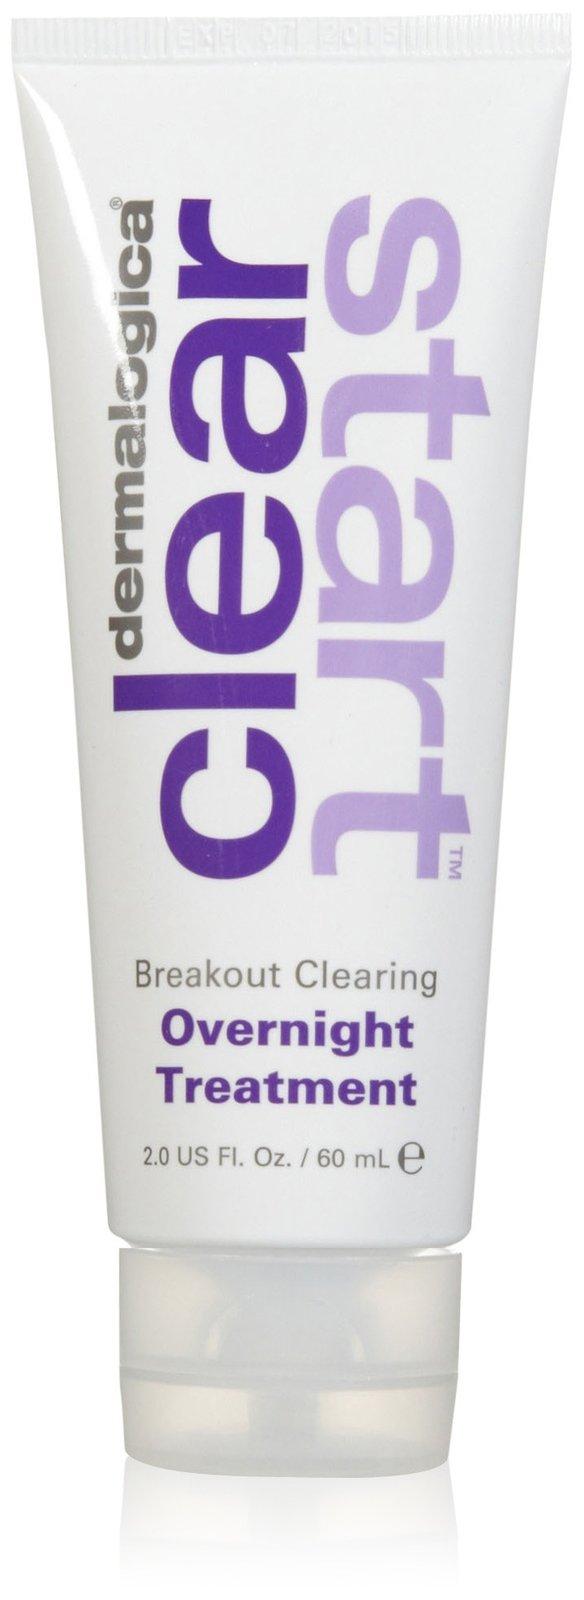 Dermalogica Clear Start Breakout Clearing Overnight Treatment - 2 Oz